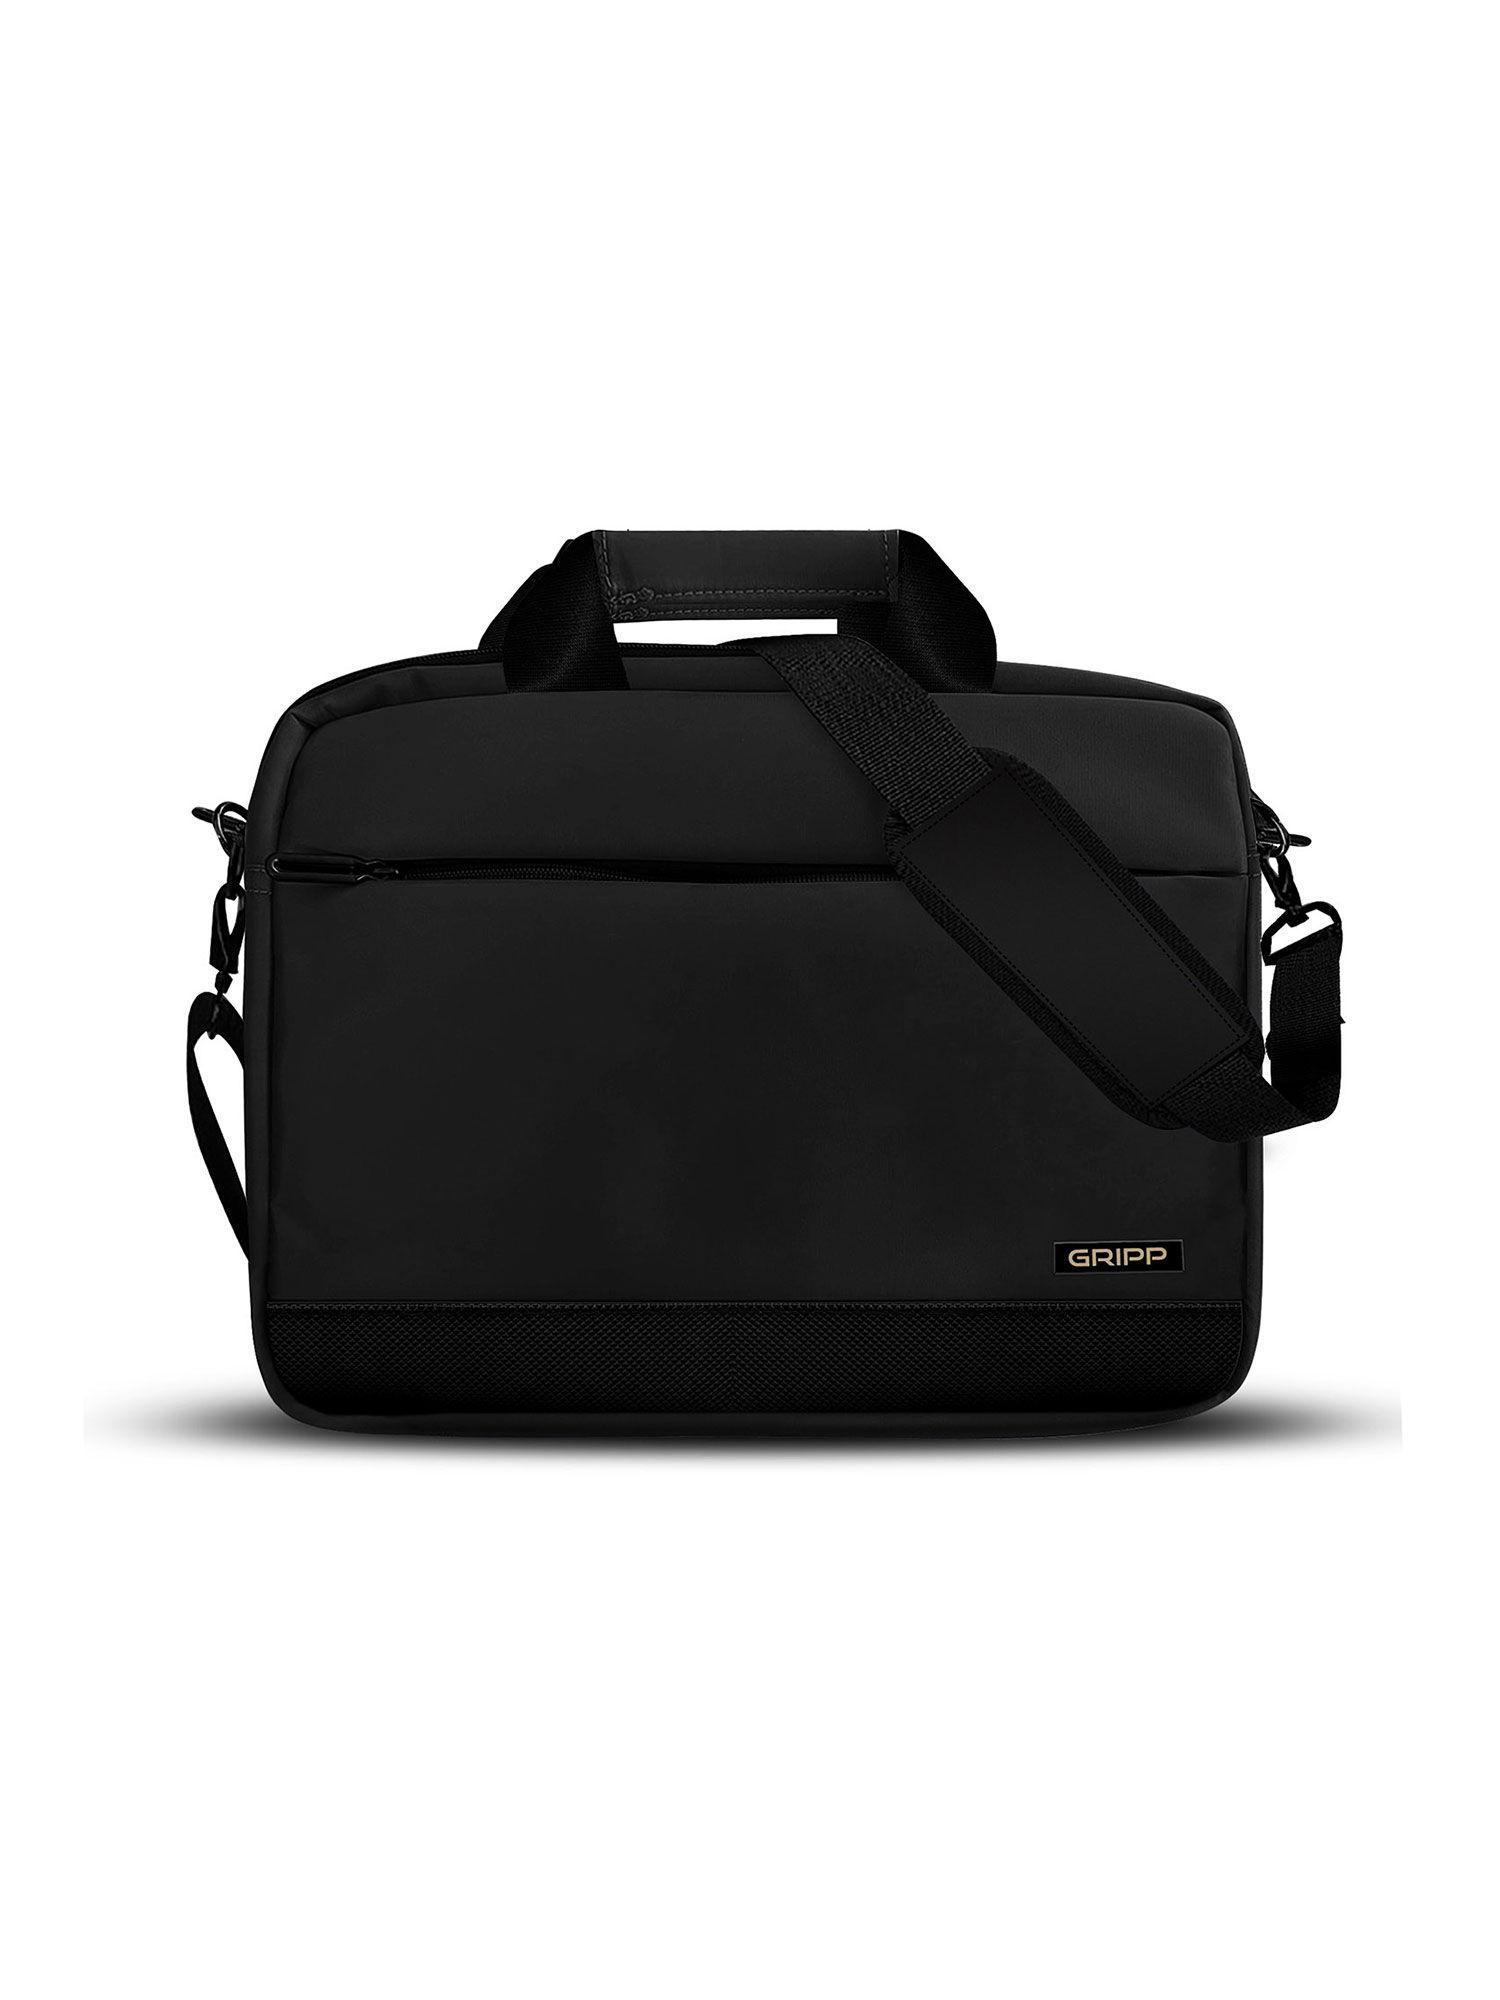 bolt executive business laptop bag 13.3 and 14 inches - black